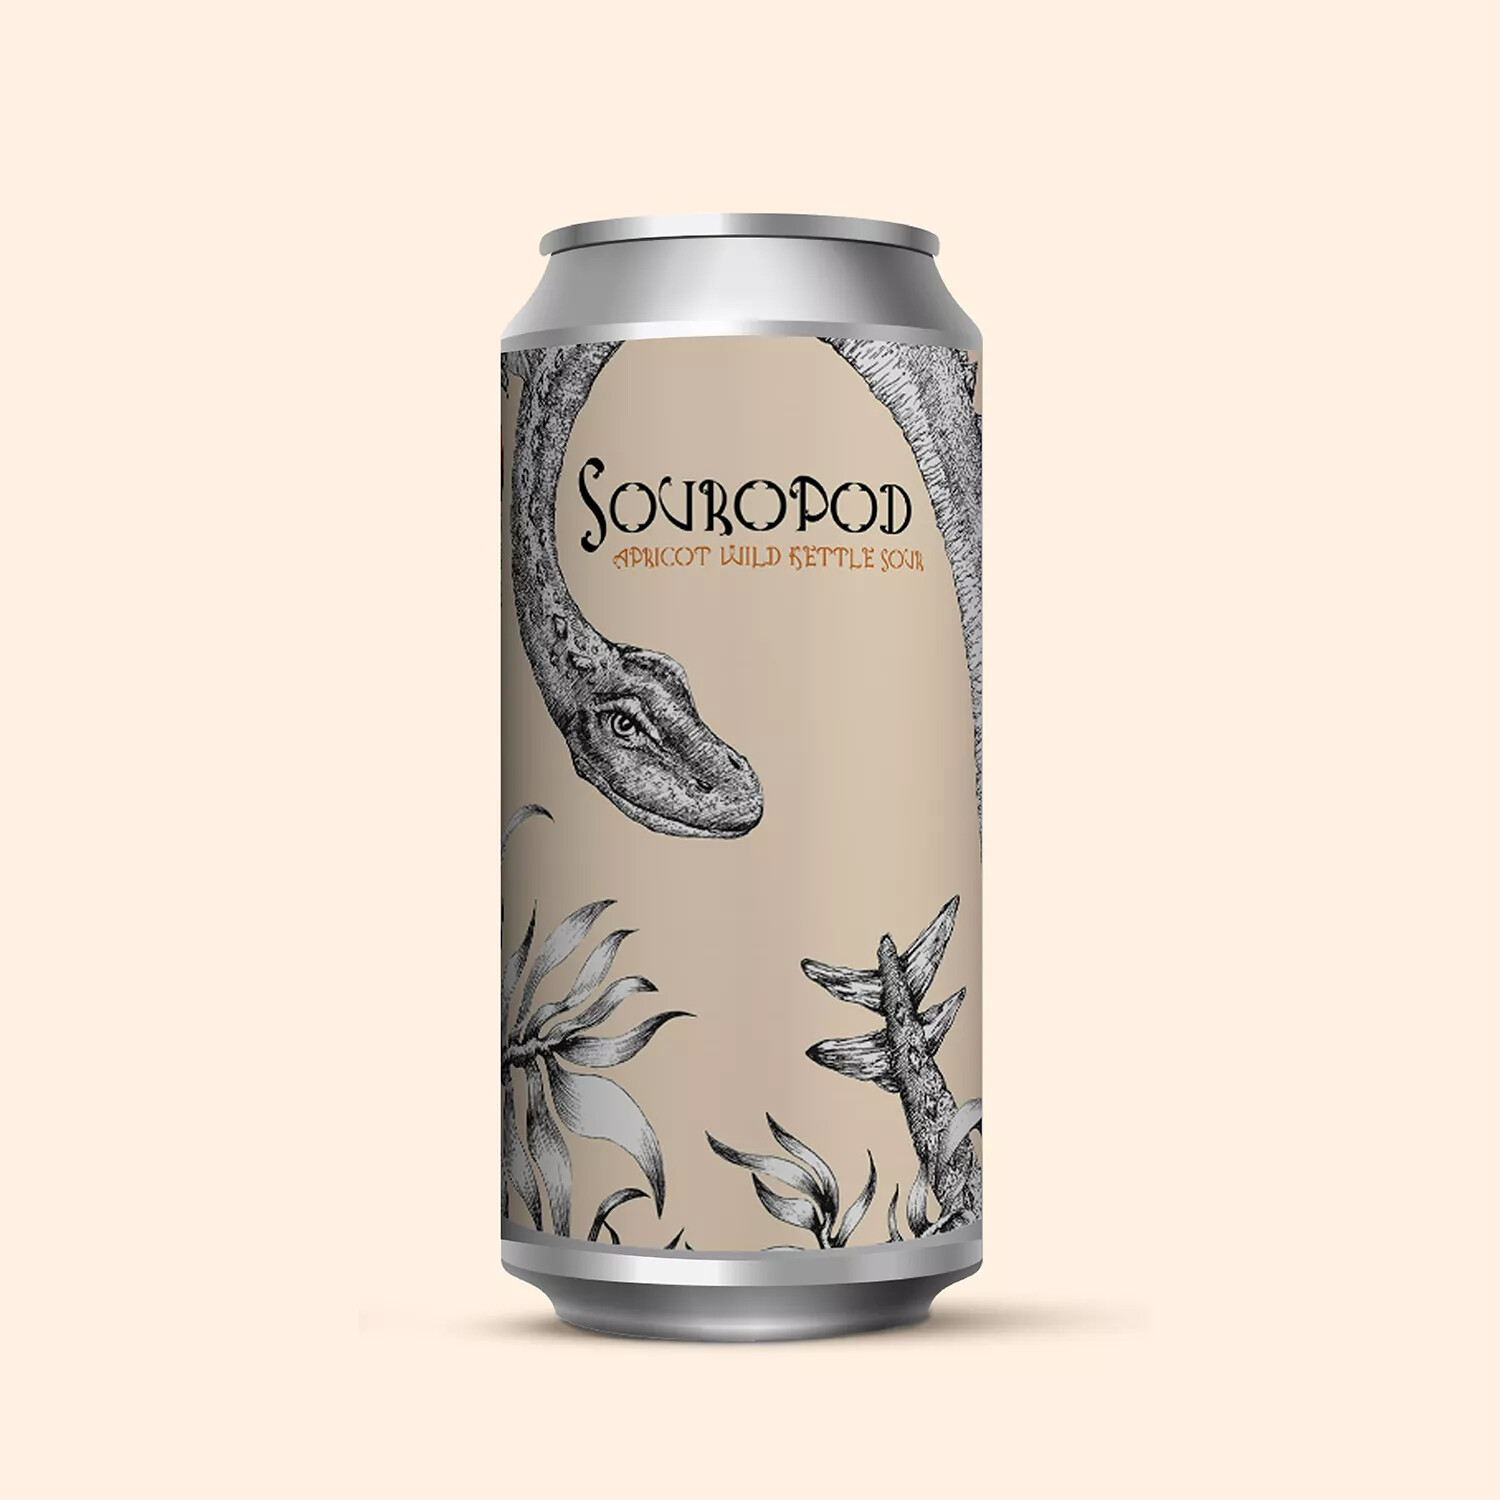 Staggeringly Good Souropod Apricot Berliner Weisse